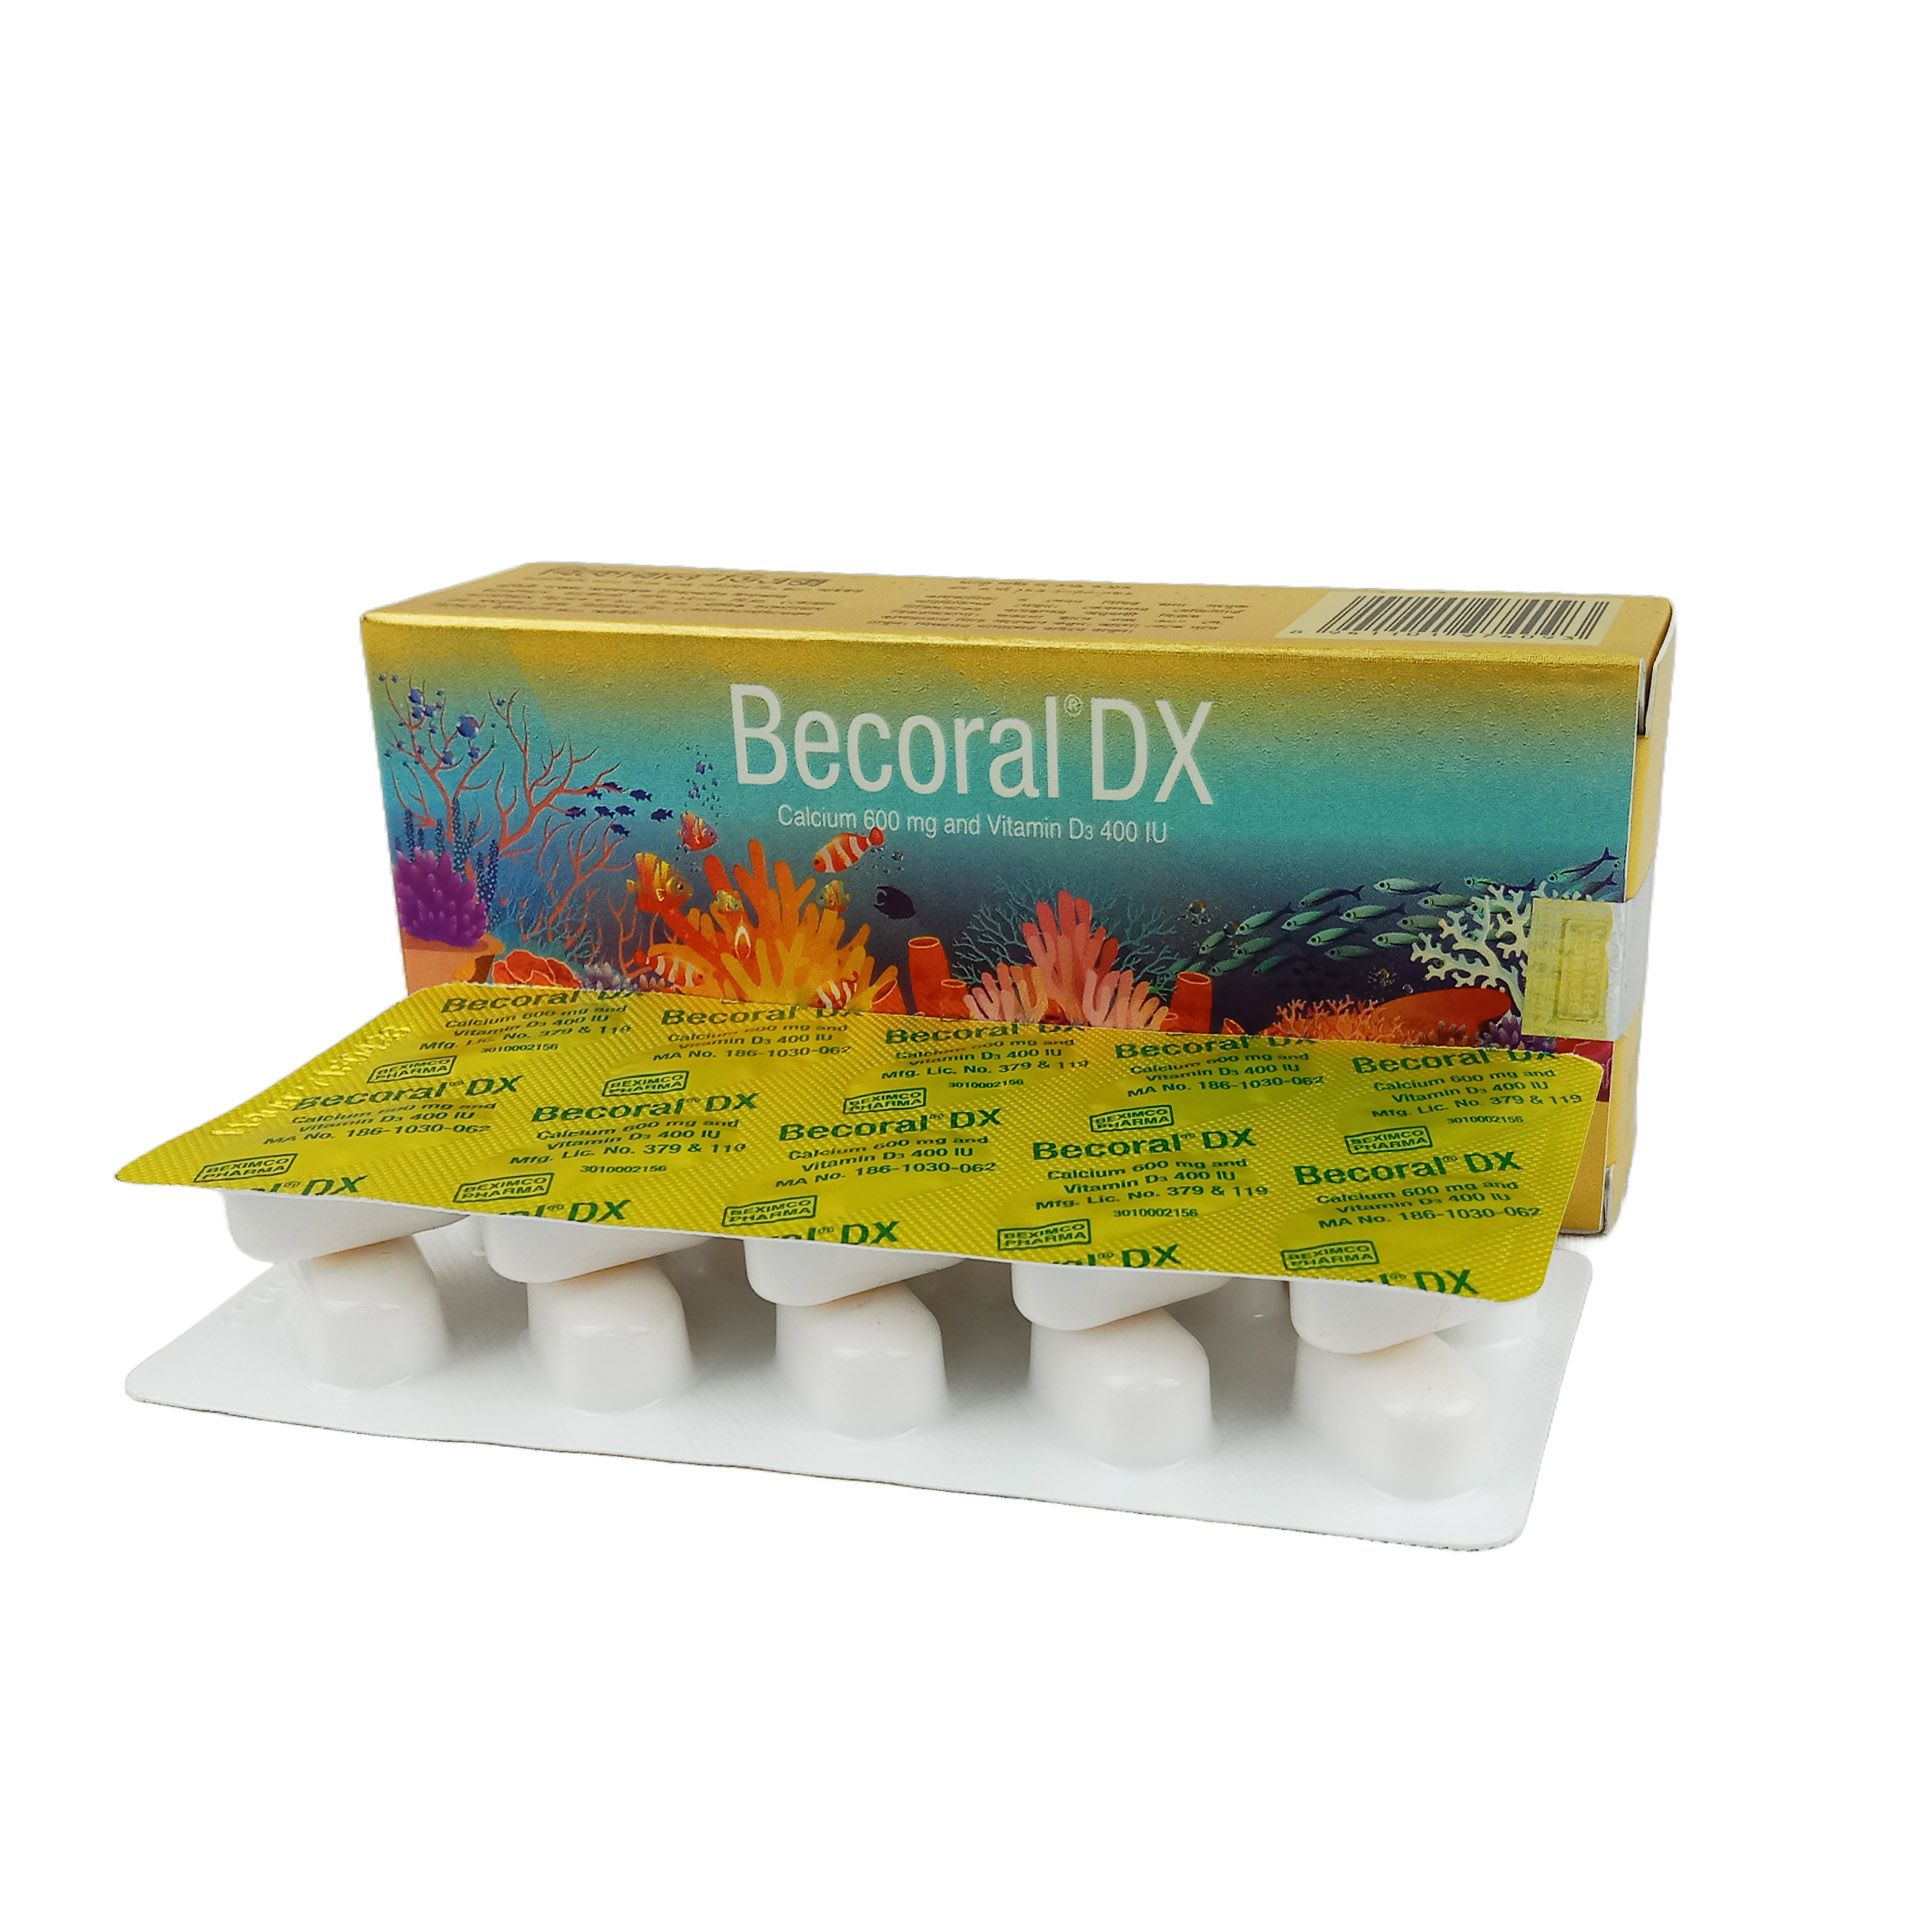 Becoral DX 600mg+400IU Tablet